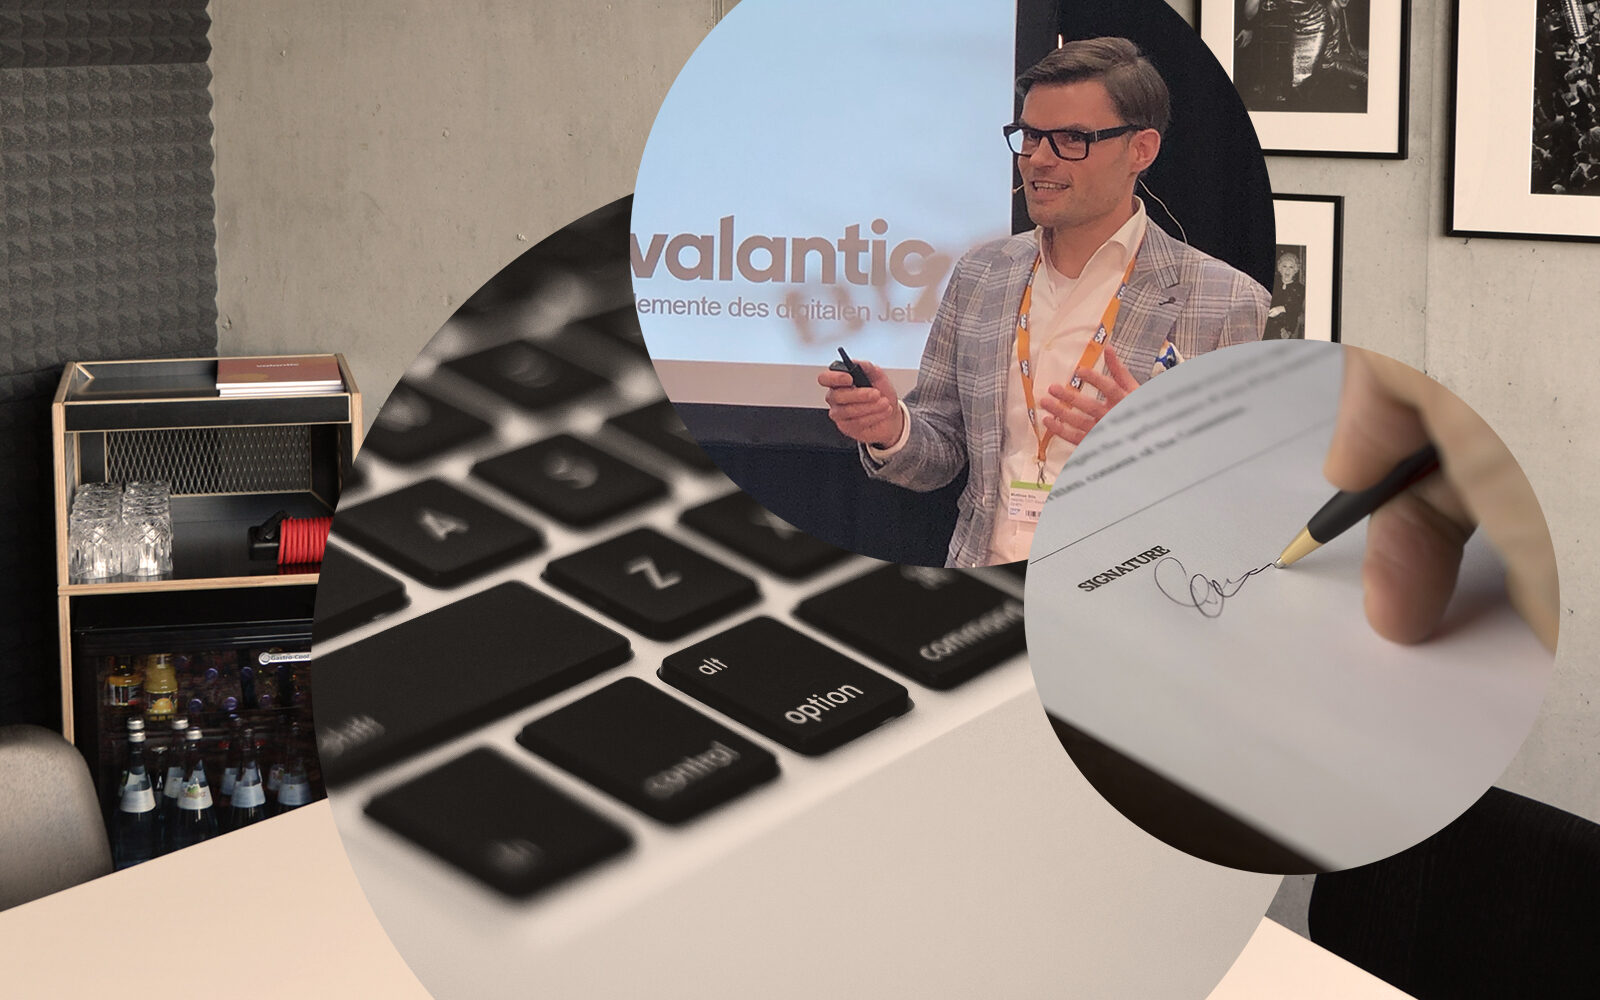 Image of Matthias Bös, Solution Architect for SAP C/4HANA at valantic Customer Engagement and Commerce, laptop keyboard, signature, conference room